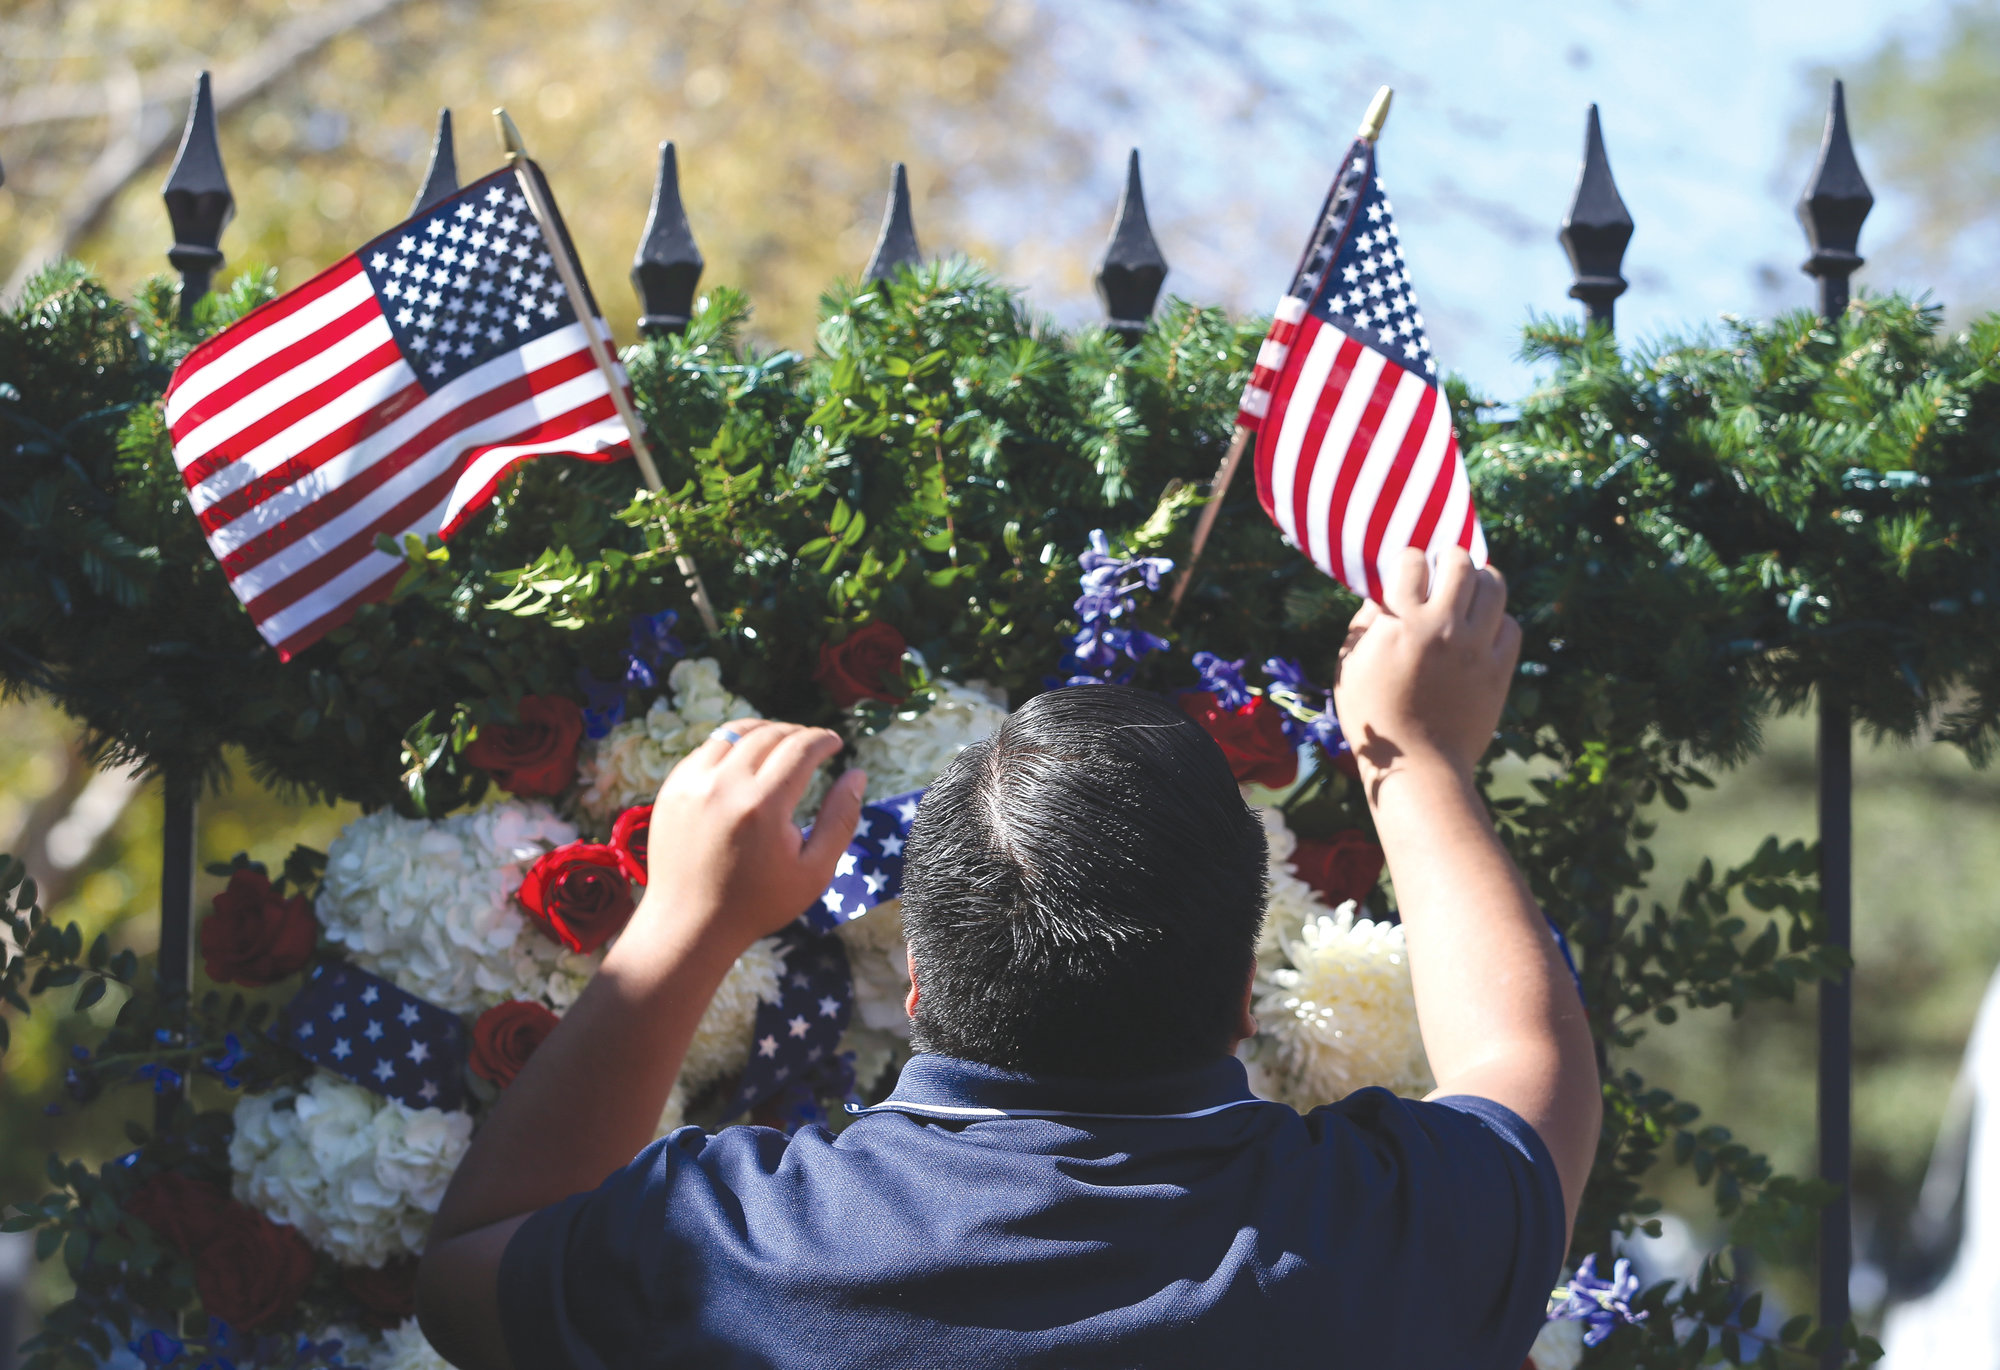 THE ASSOCIATED PRESSErick Herrera makes sure the two small American flags are placed correctly on the presidential wreath on the gate outside of former President George H.W. Bush's residence on Dec. 1 in Houston.